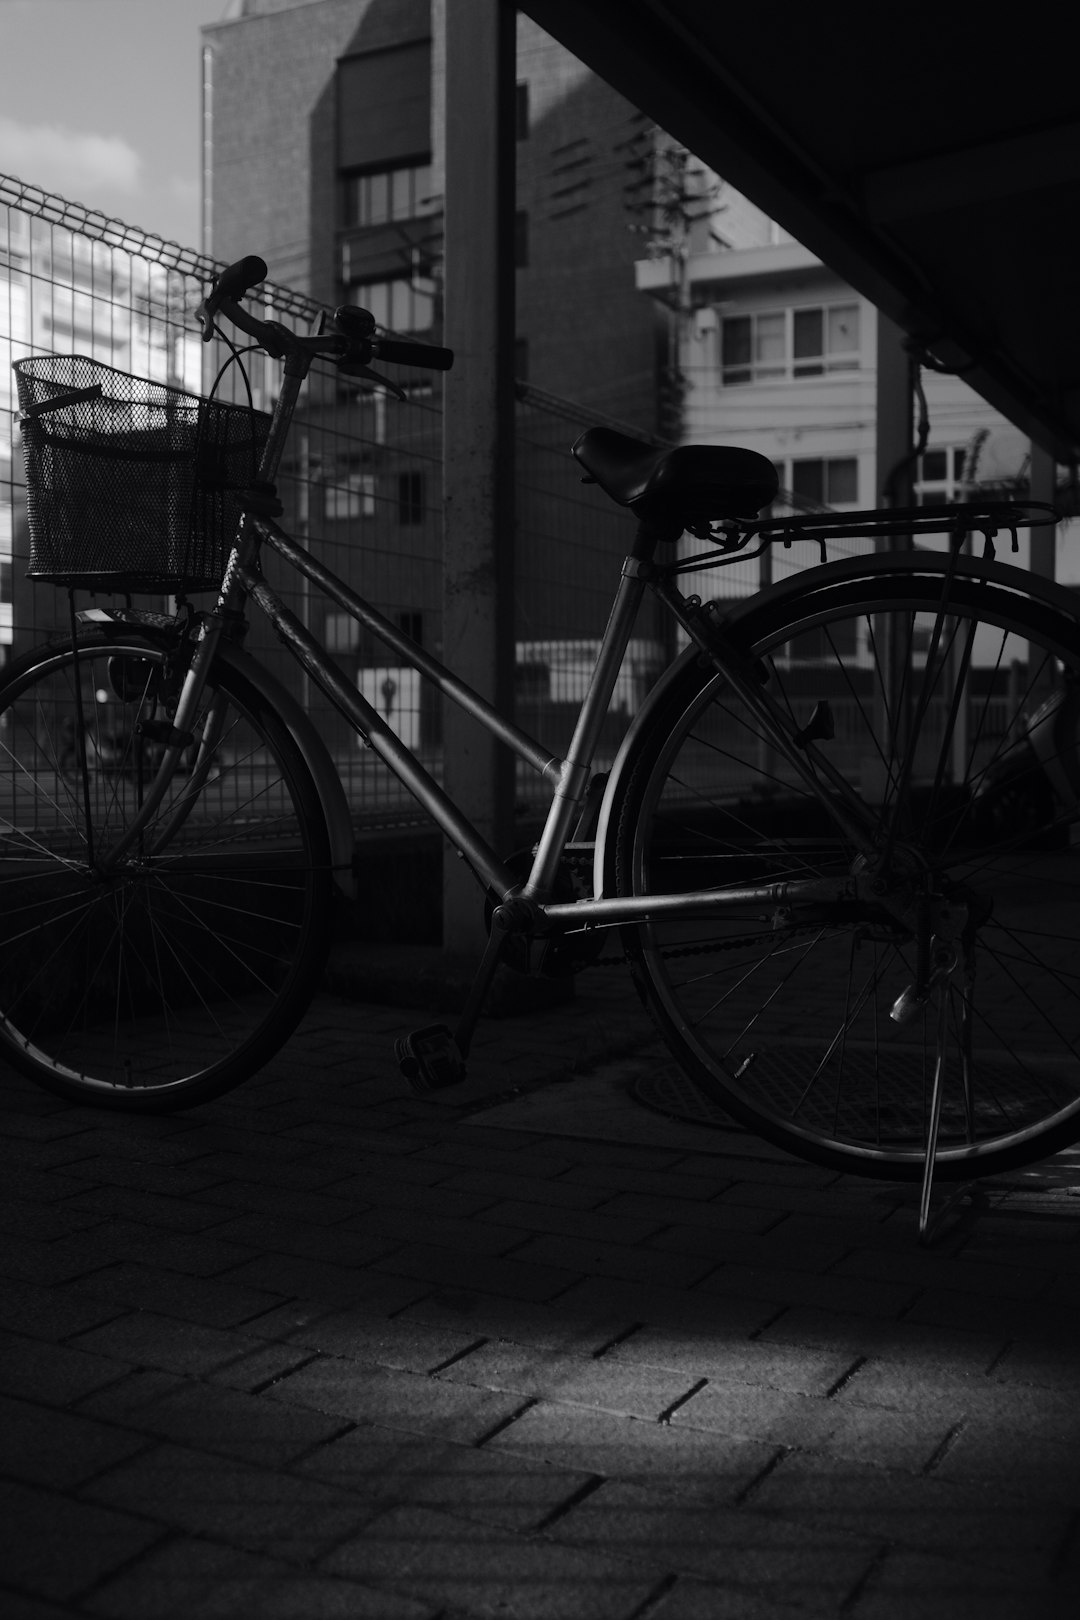 grayscale photo of city bicycle parked beside metal fence